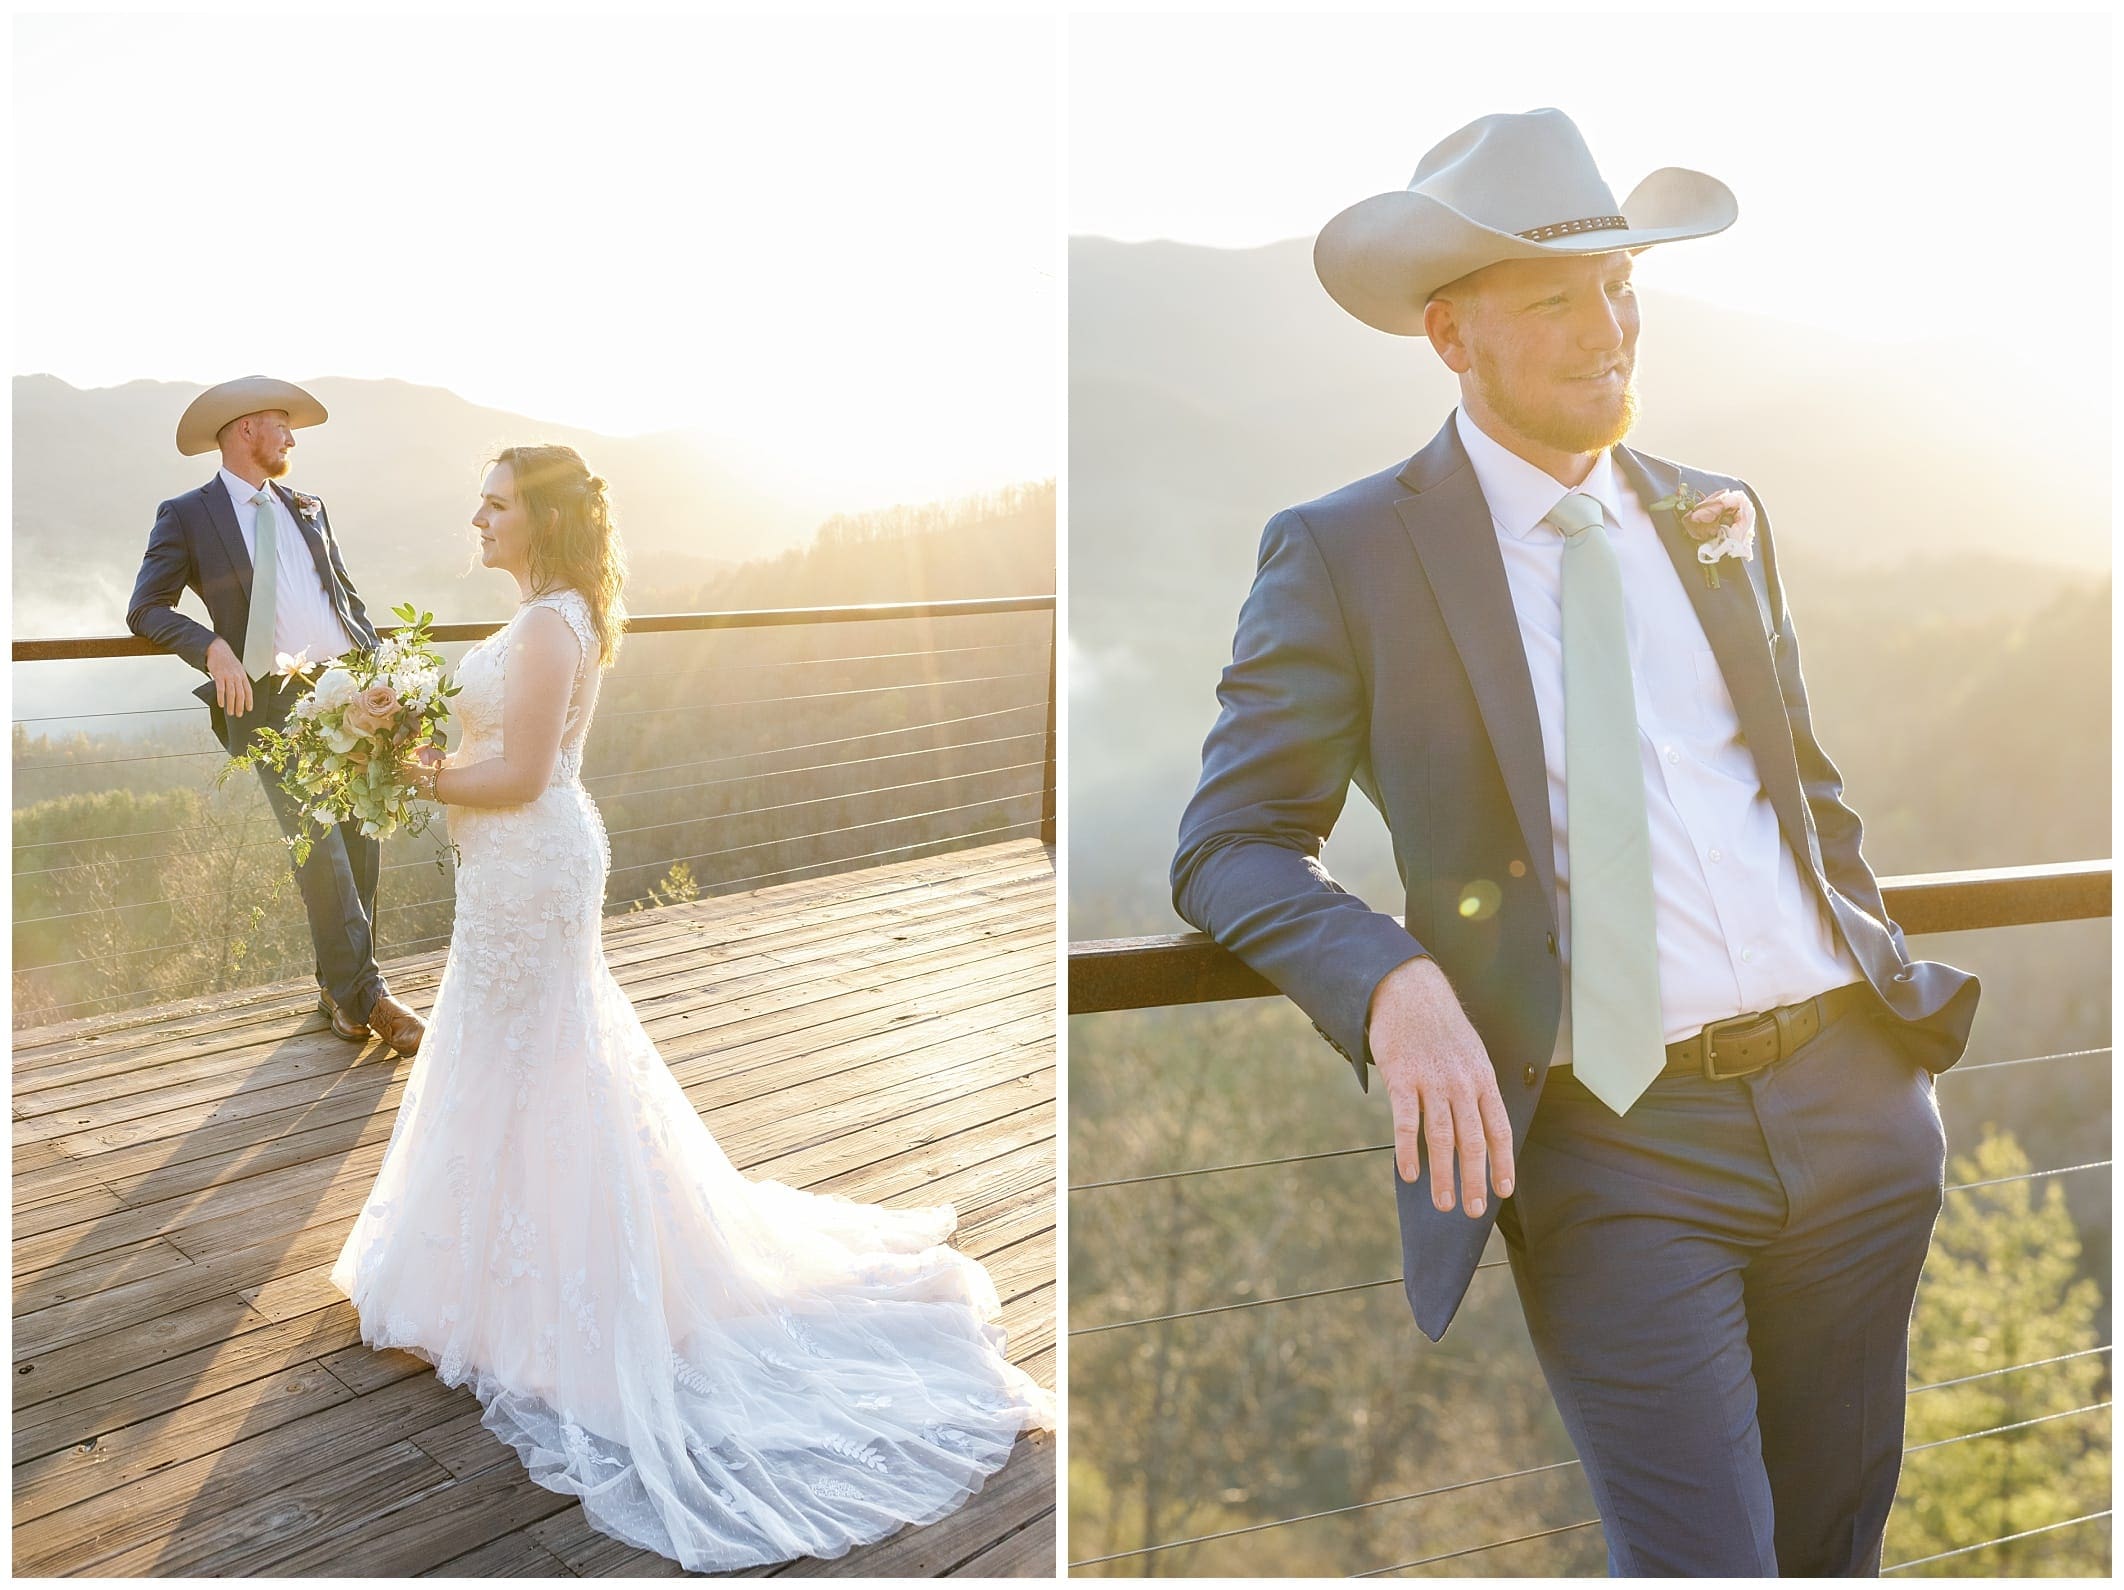 Bride and groom photos at sunset at Parker Mill venue with mountain views in the background